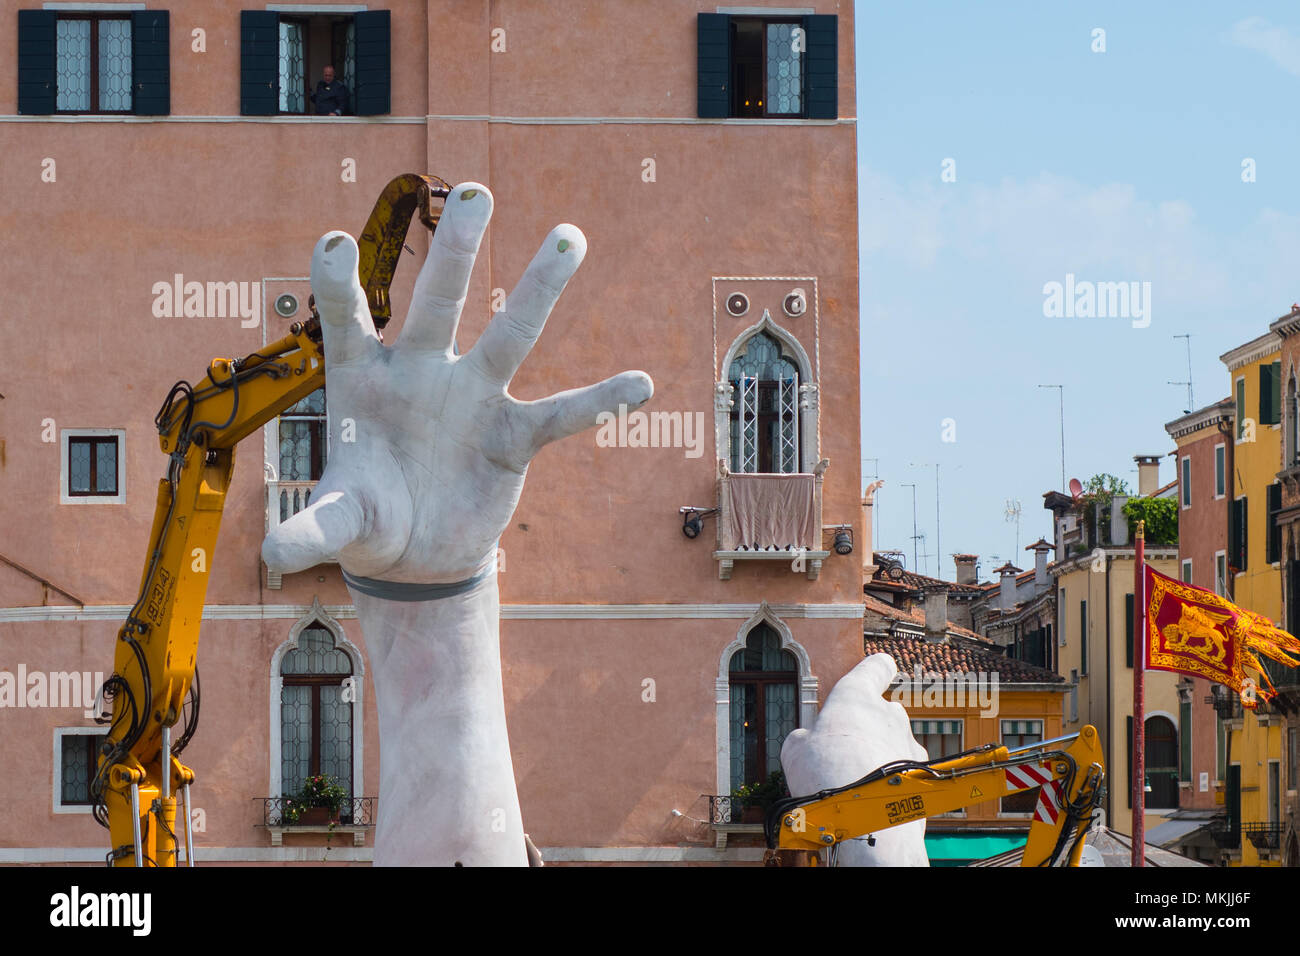 VENICE, ITALY. 08 MAY, 2018. One hand of the work of Lorenzo Quinn is disassembled and placed on a large barge for transport in Venice, Italy on 5 May 2018. The work of the artist Lorenzo Quinn 'Support', known as the 'big hands that support Venice', leave the Grand Canal to return to the artist's studio in Spain. © Simone Padovani / Awakening / Alamy Live News Stock Photo